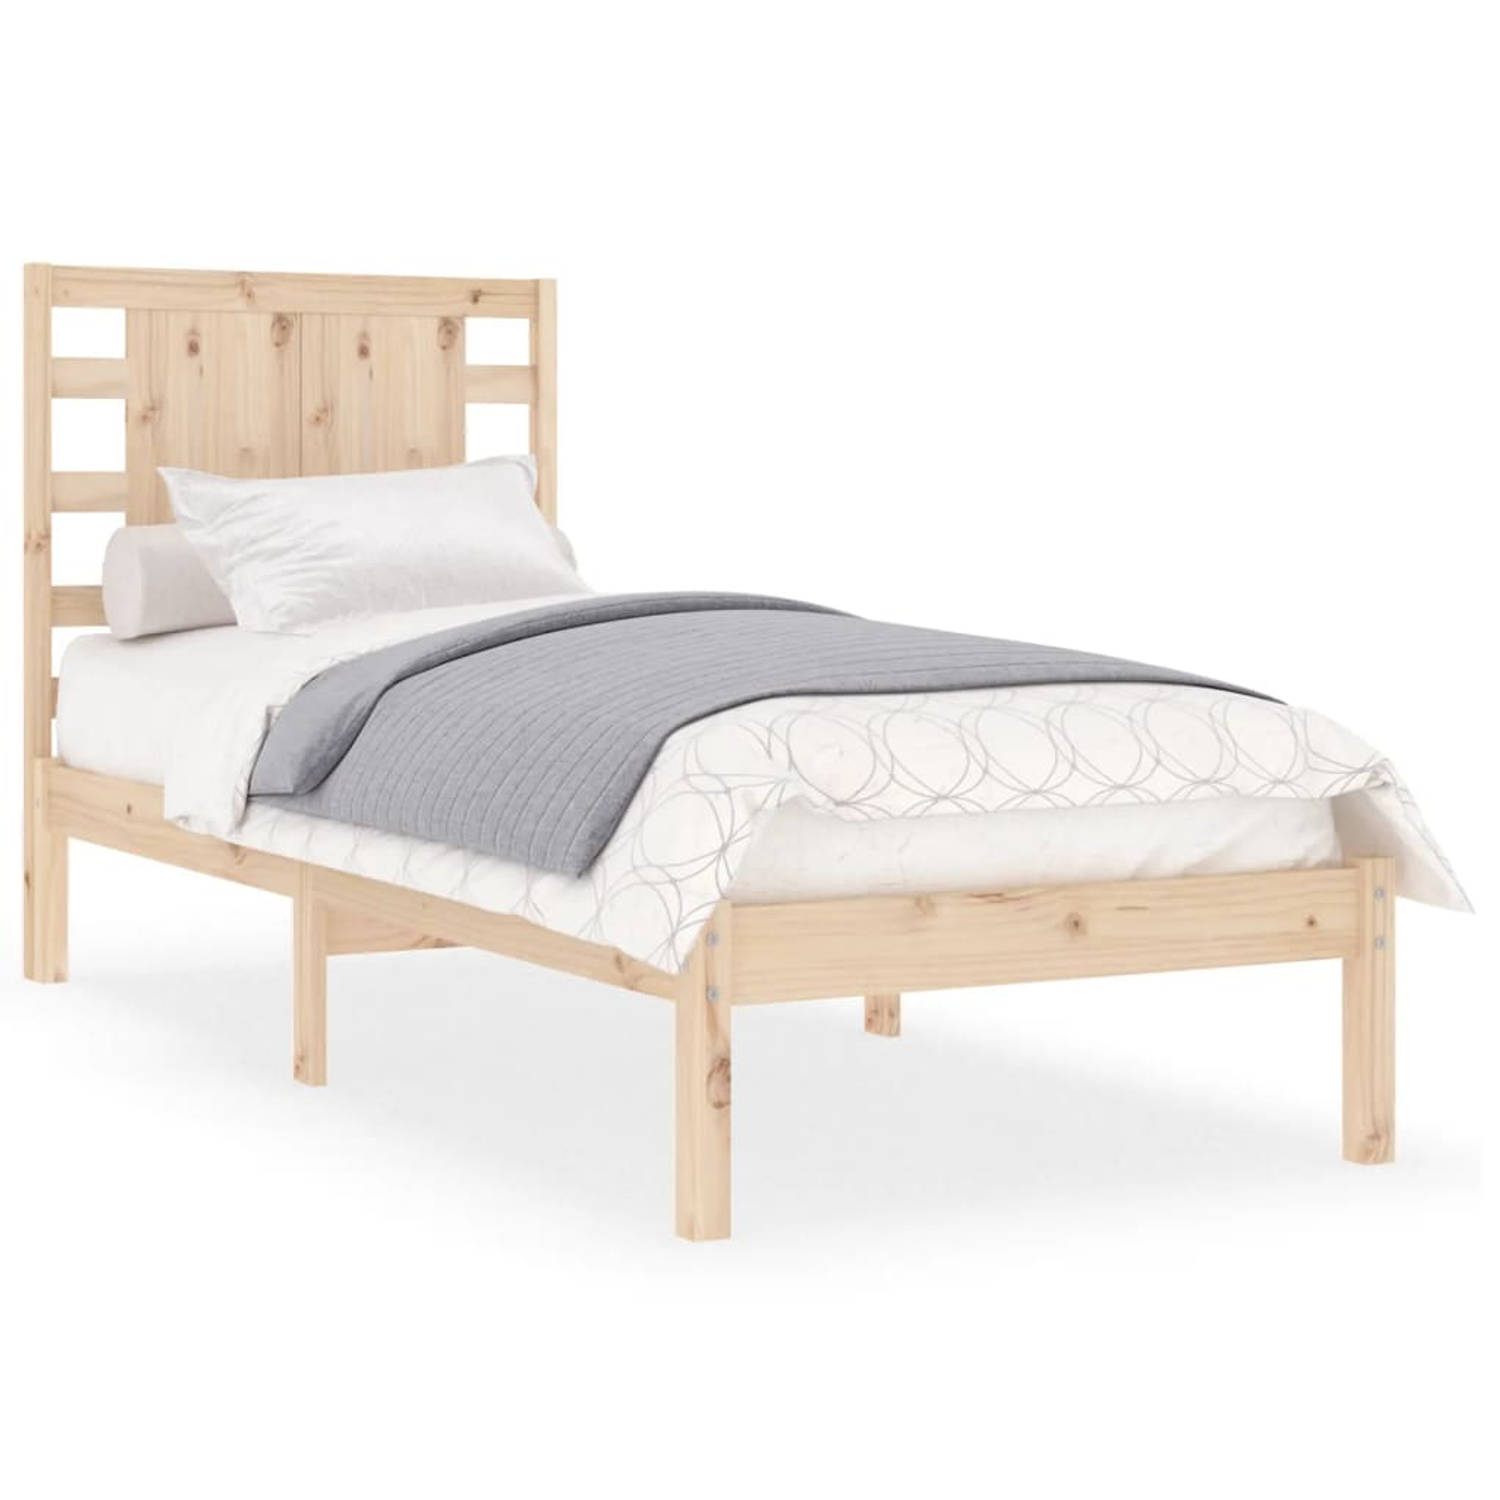 The Living Store Bedframe massief grenenhout 100x200 cm - Bedframe - Bedframes - Eenpersoonsbed - Bed - Bedombouw - Ledikant - Houten Bedframe - Eenpersoonsbedden - Bedden - Bedomb